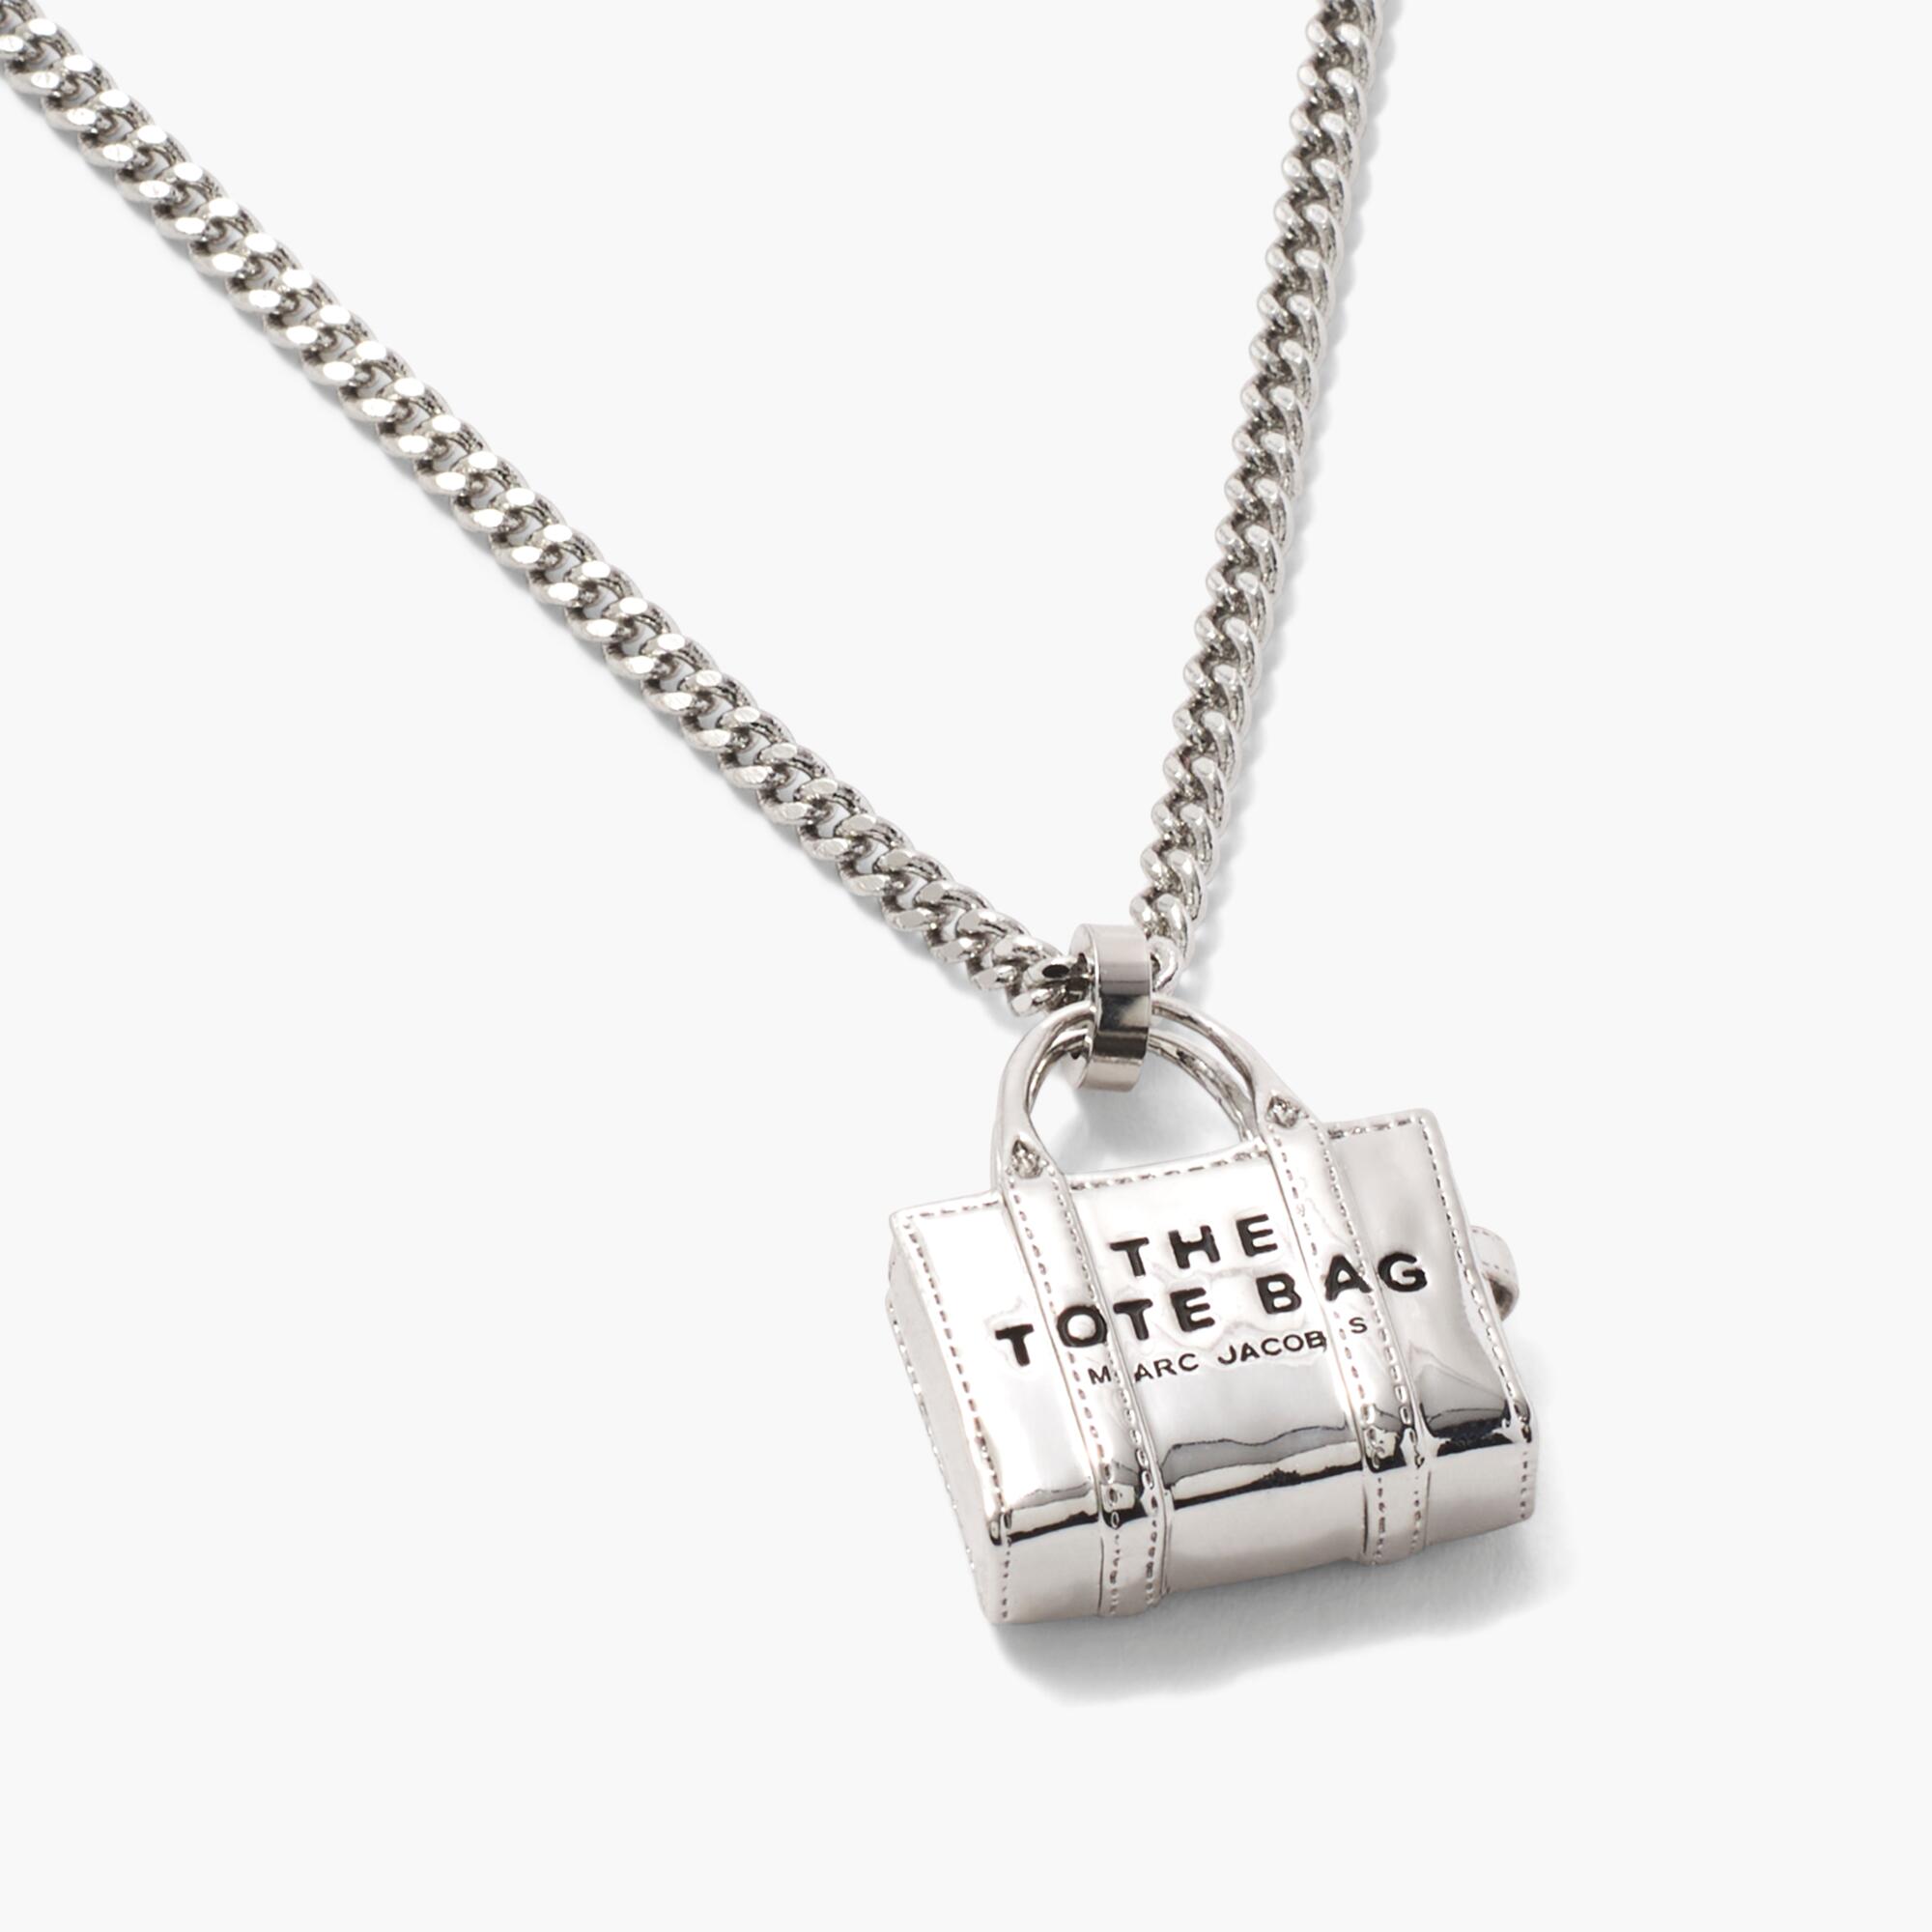 The Marc Jacobs Tote Bag Necklace featuring a mini silver bag and a chain.